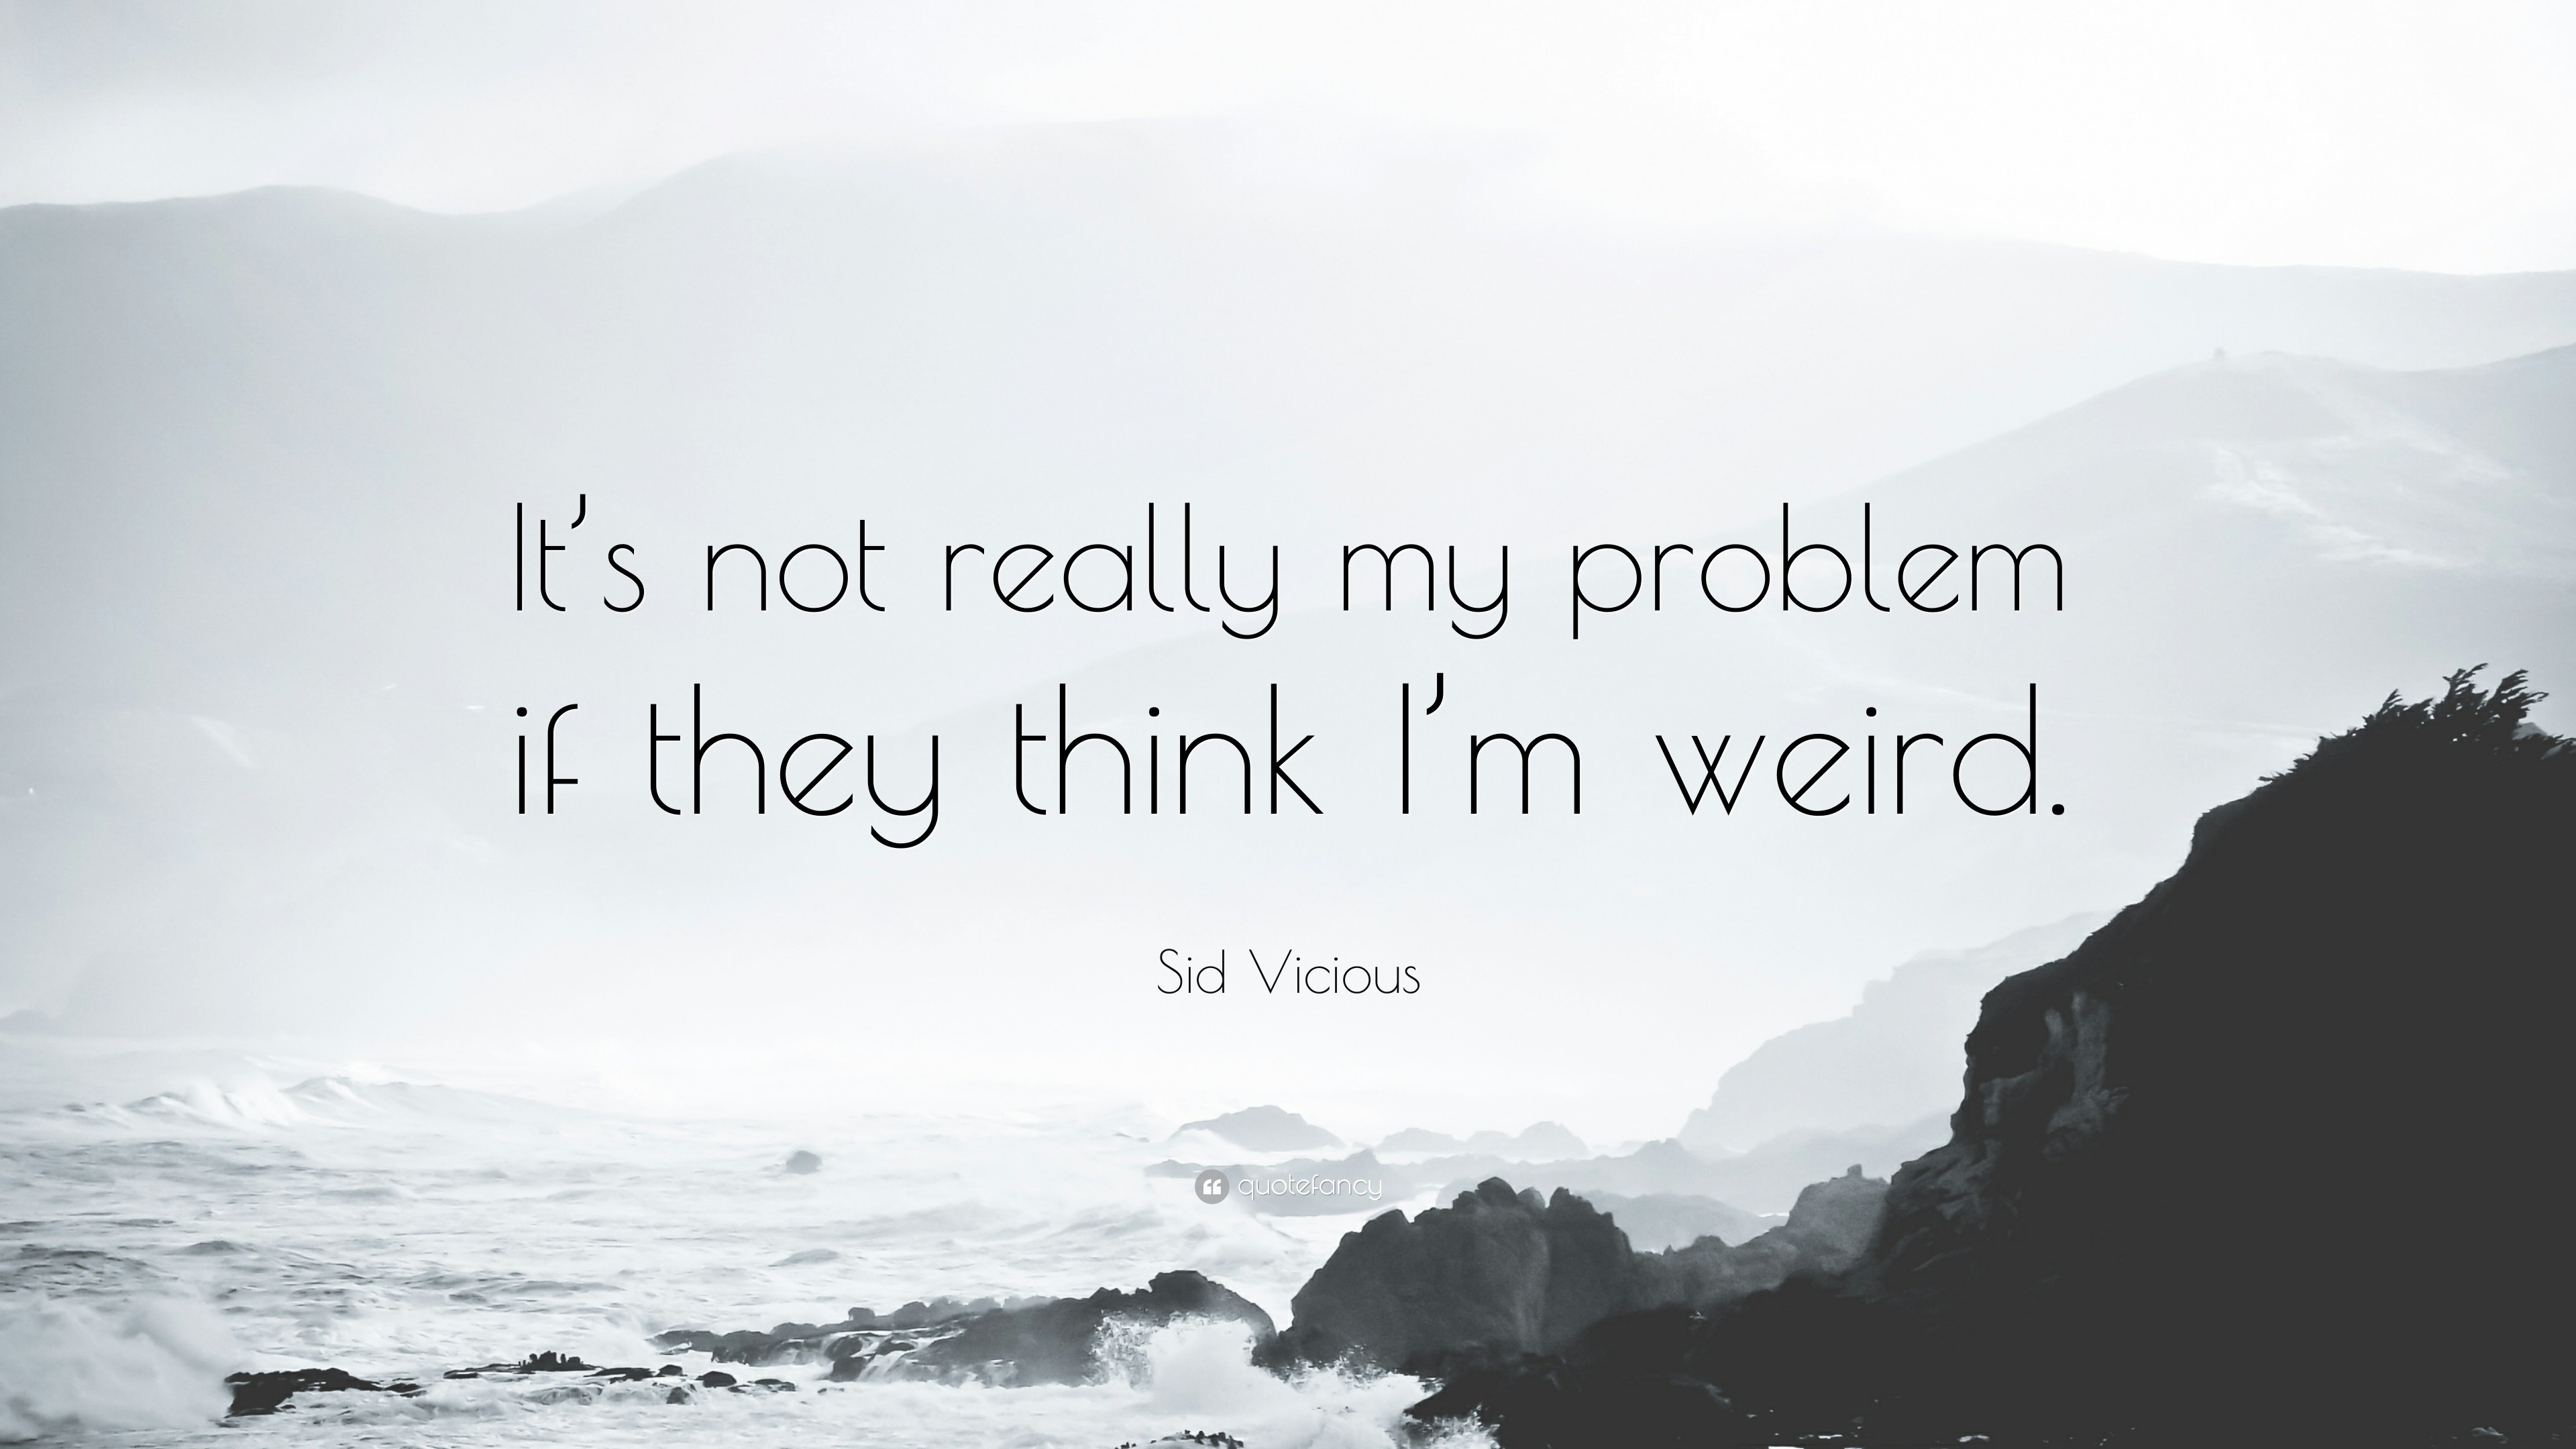 3840x2160 Sid Vicious Quote: “It's not really my problem if they think I'm